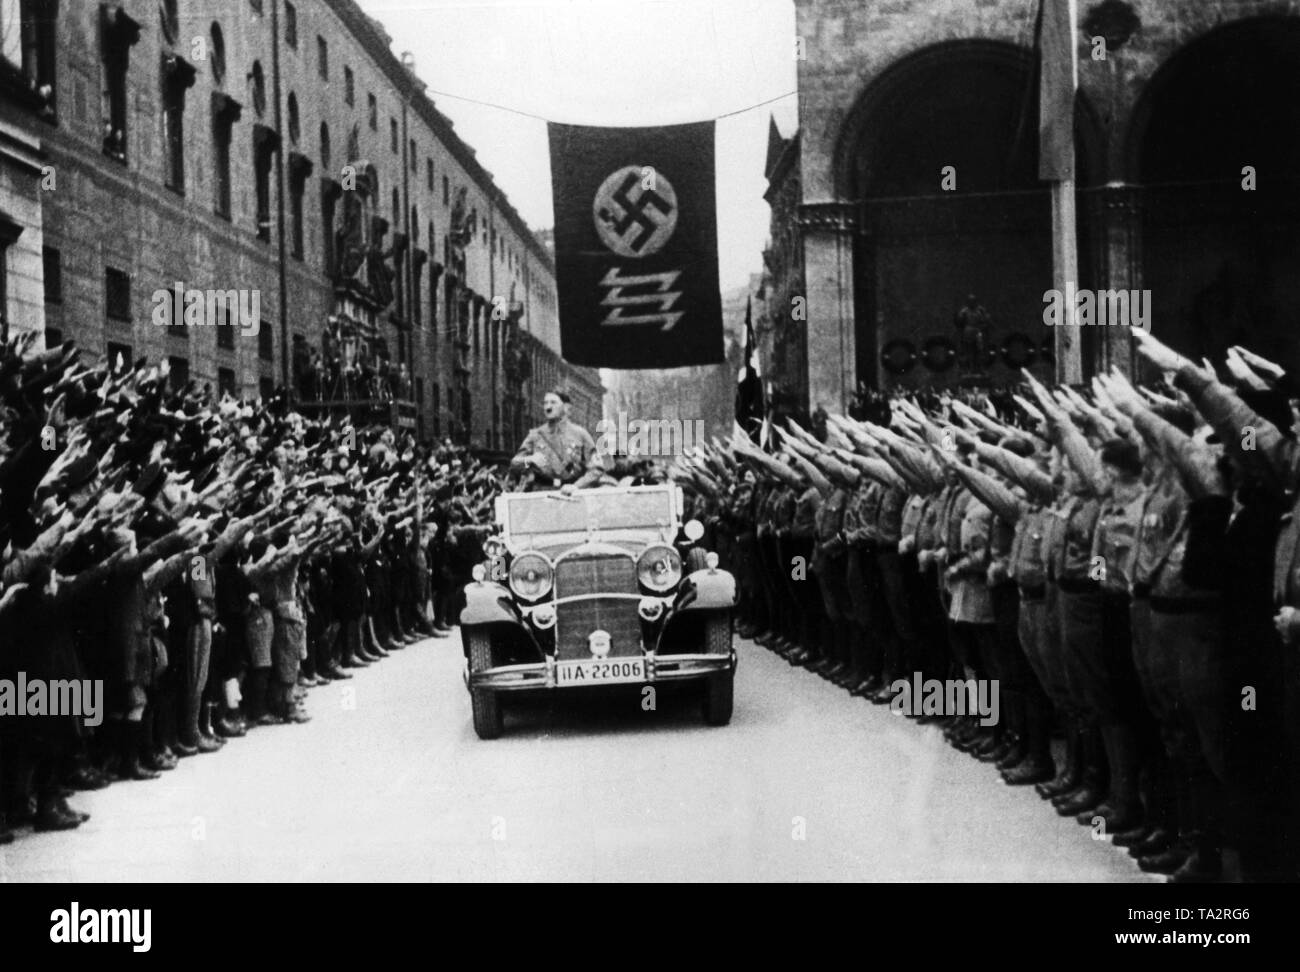 Adolf Hitler drives in an open car along the Residenzstrasse in Munich. To the right and left of the street is the Feldherrenhalle and the Residenz. Between the two buildings is a flag with swastika and a triple siegrune. Undated photo. Stock Photo